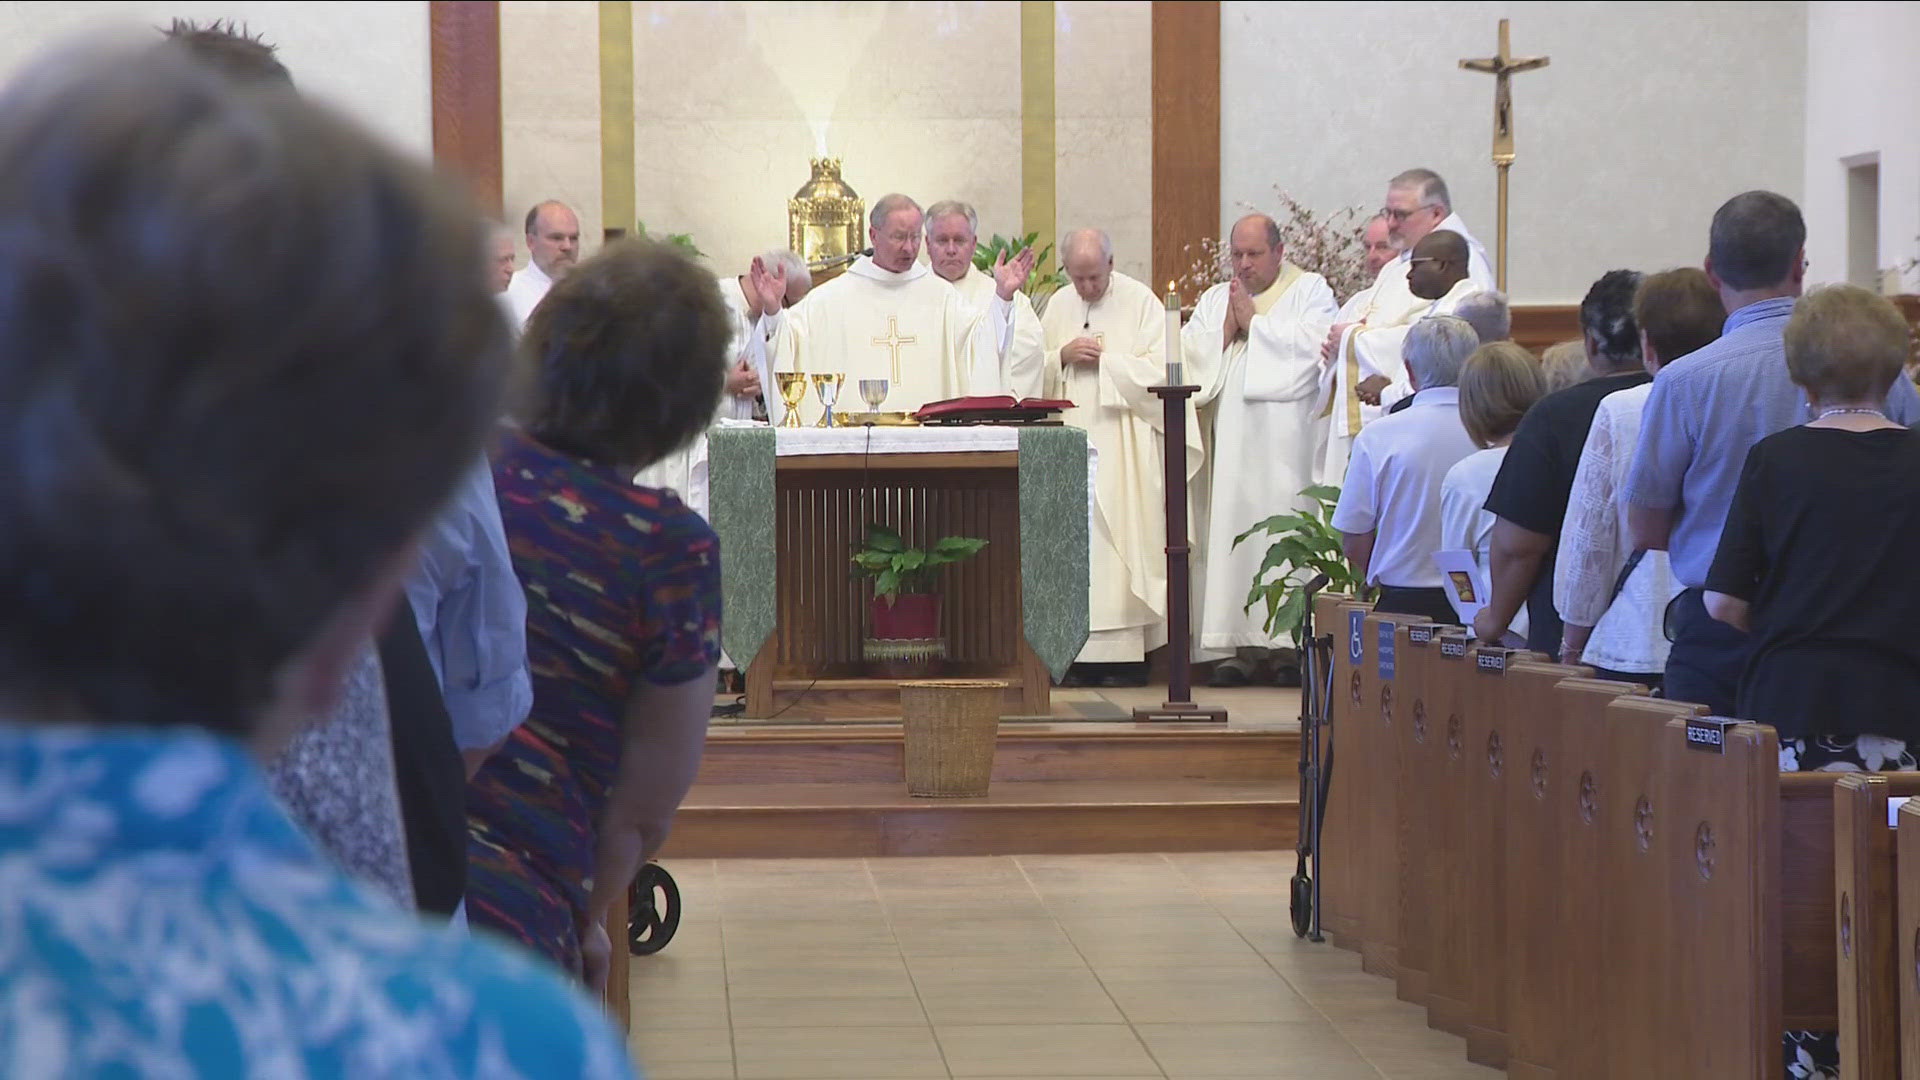 St. Andrew's Roman Catholic Church held its final Mass Sunday as the Buffalo Diocese opted to close the parish amid financial problems.